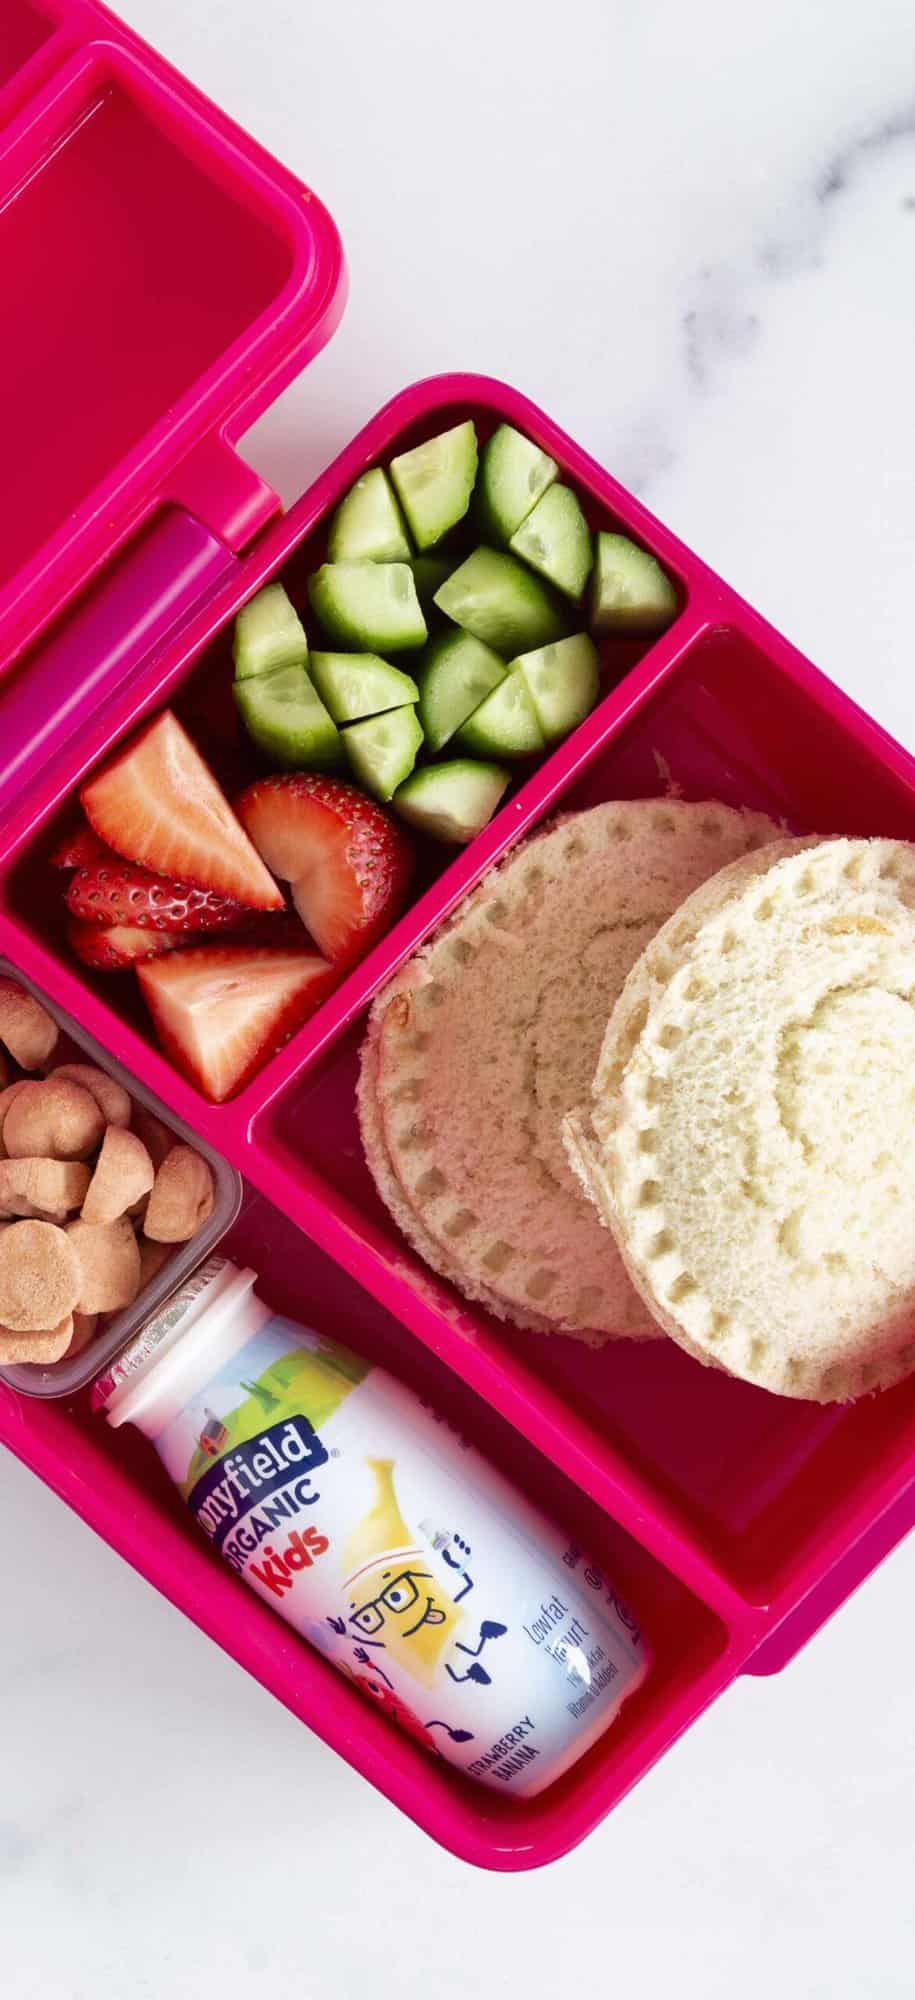 https://www.yummytoddlerfood.com/wp-content/uploads/2022/05/Camp-Lunch-2-vert-scaled.jpg